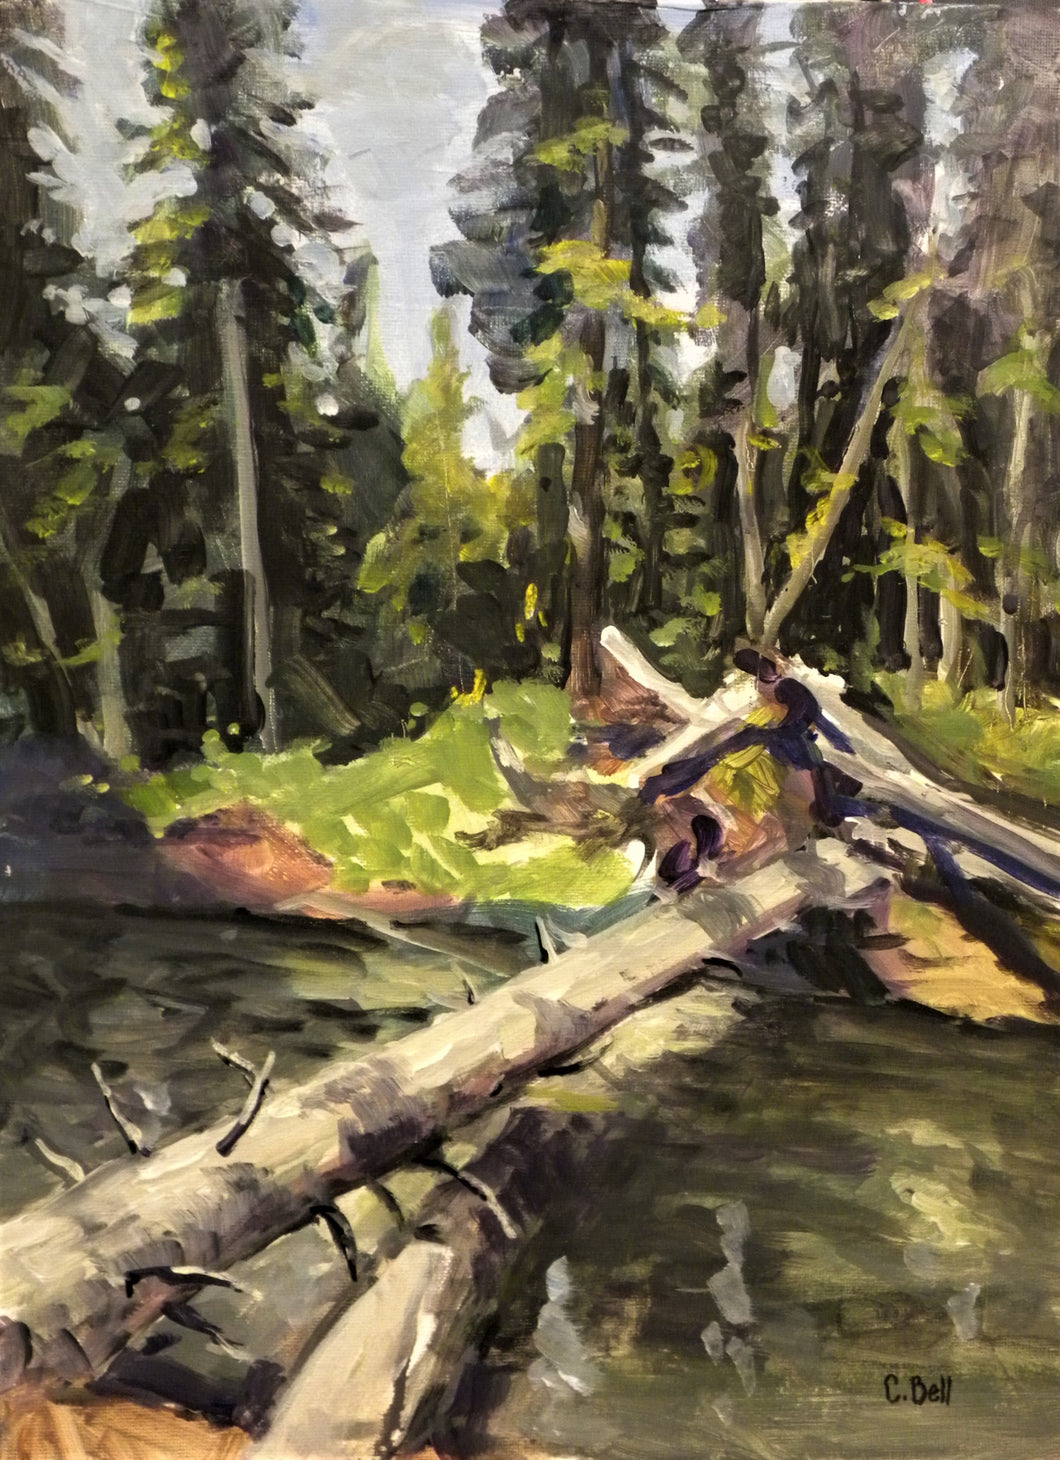 Colin Bell - Forty Mile Creek Deadfall